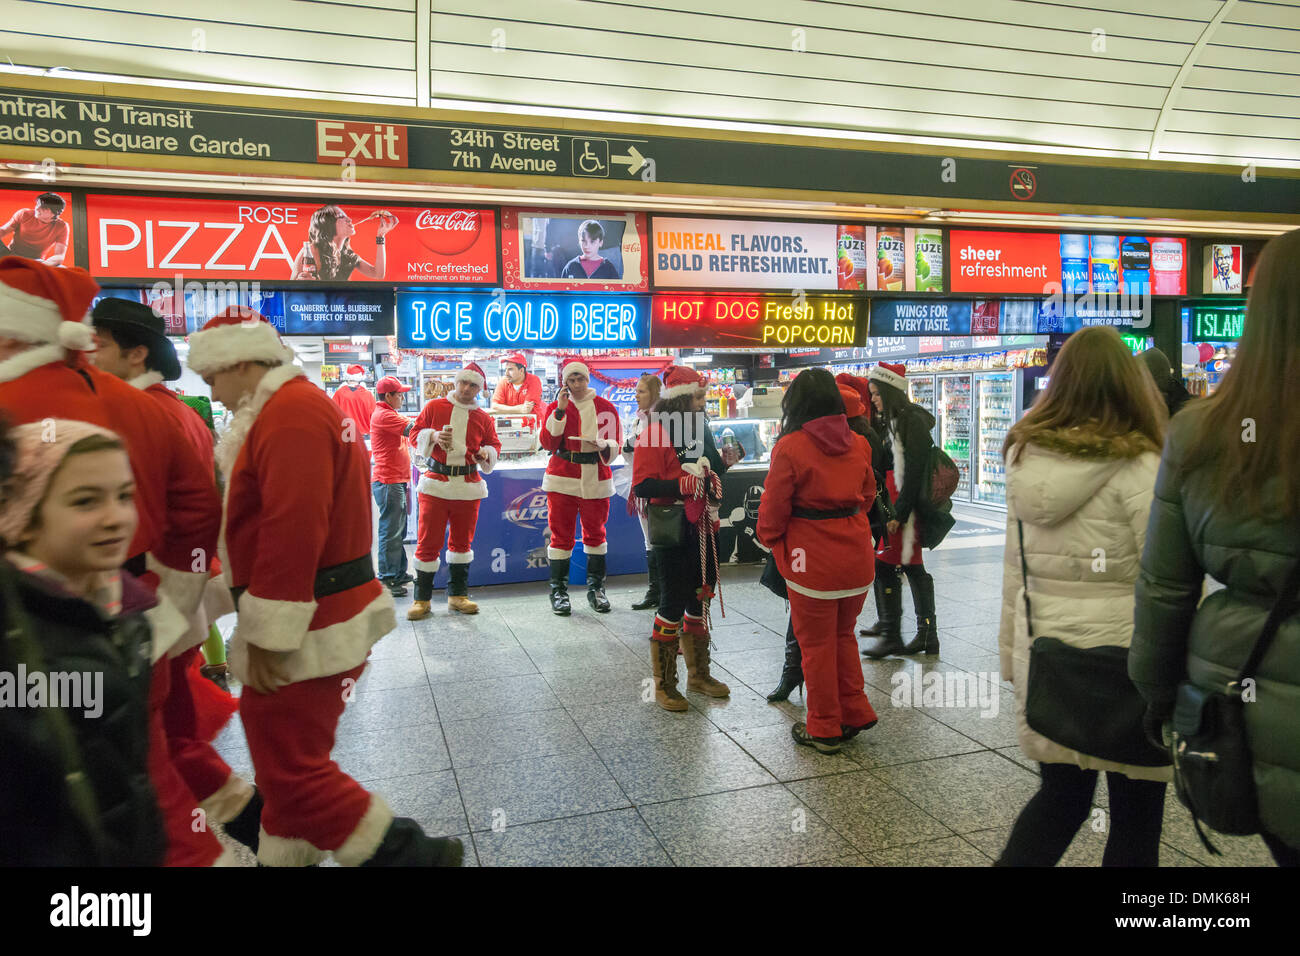 New York, USA. 14th December 2013. Christmas revelers arrive at Pennsylvania Station for the annual SantaCon in New York .  Santacon, primarily a pub crawl in Santa and other Christmas related costumes, attracts thousands of masqueraders going from bar to bar. The drinkers were encouraged to imbibe at establishments which are participating in Toys For Tots. This year some communities are complaining about vomiting, public urination and other misbehavior that accompanies the event resulting in a police and transit crackdown. Credit:  Richard Levine/Alamy Live News Stock Photo